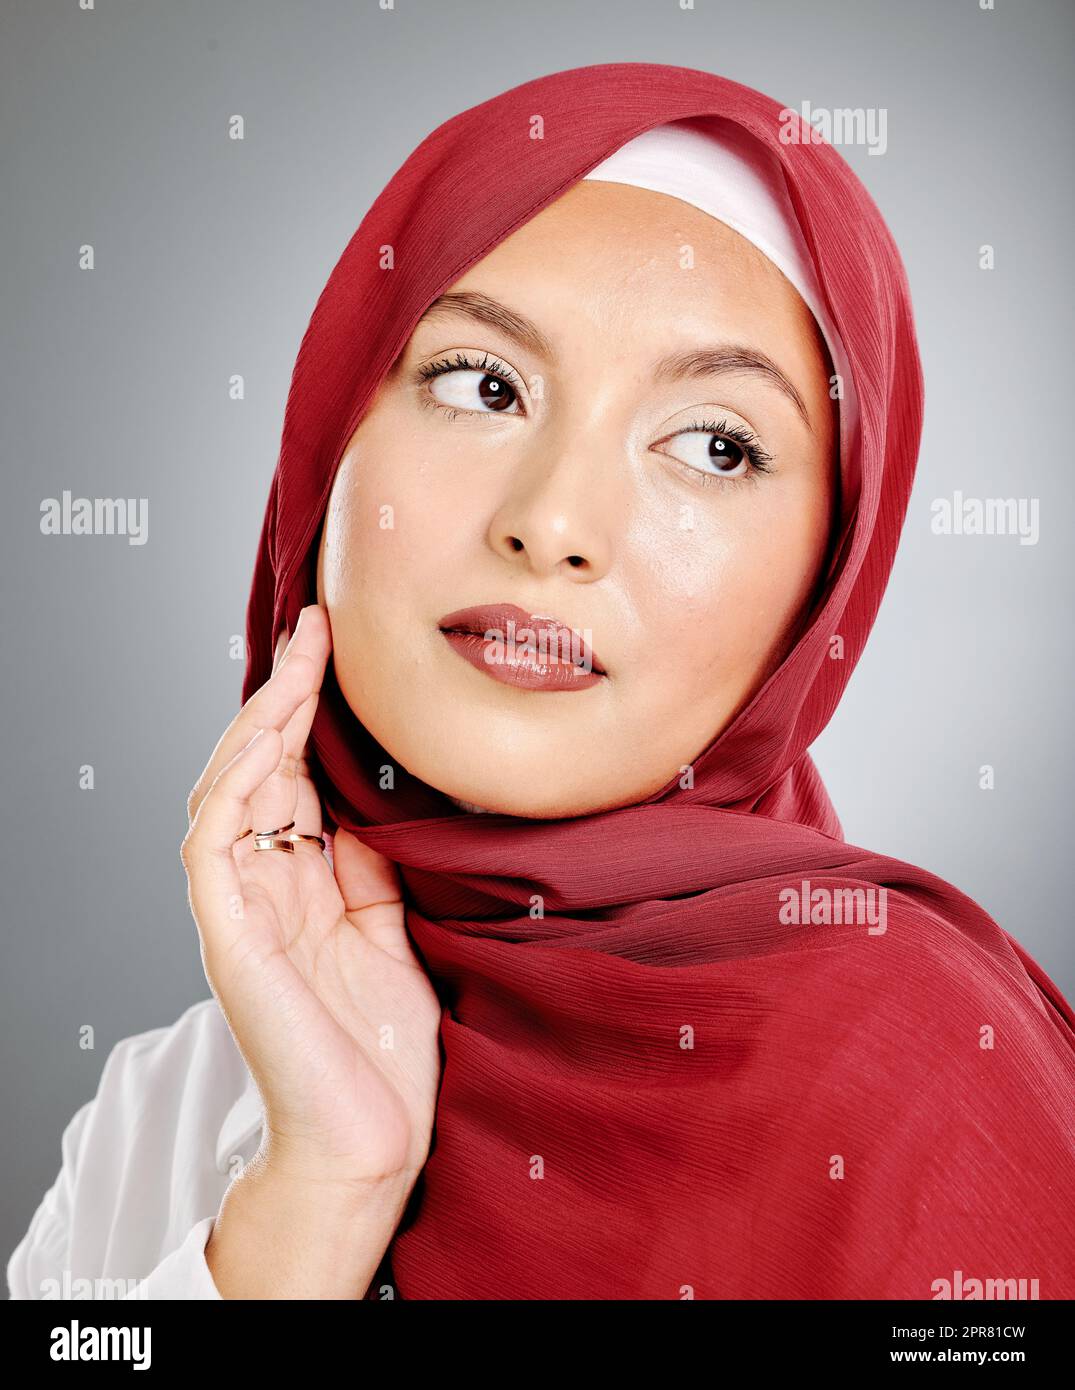 A glowing beautiful muslim woman isolated against grey copyspace background. Young woman wearing a hijab or headscarf showing her eyelash extensions while daydreaming, touching her flawless skin Stock Photo